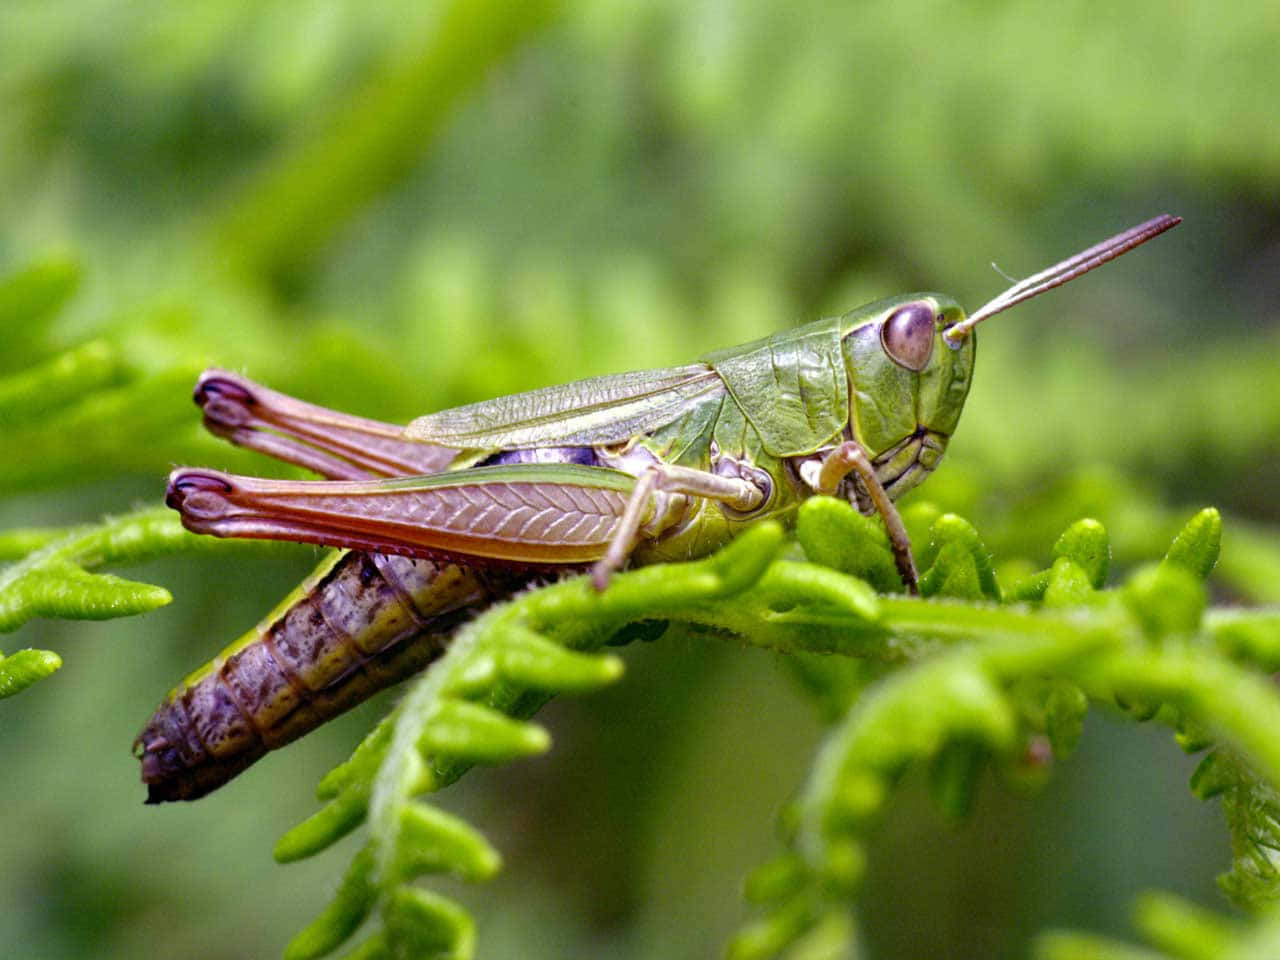 Close-Up Shot of Green Grasshopper Perched on Leaves